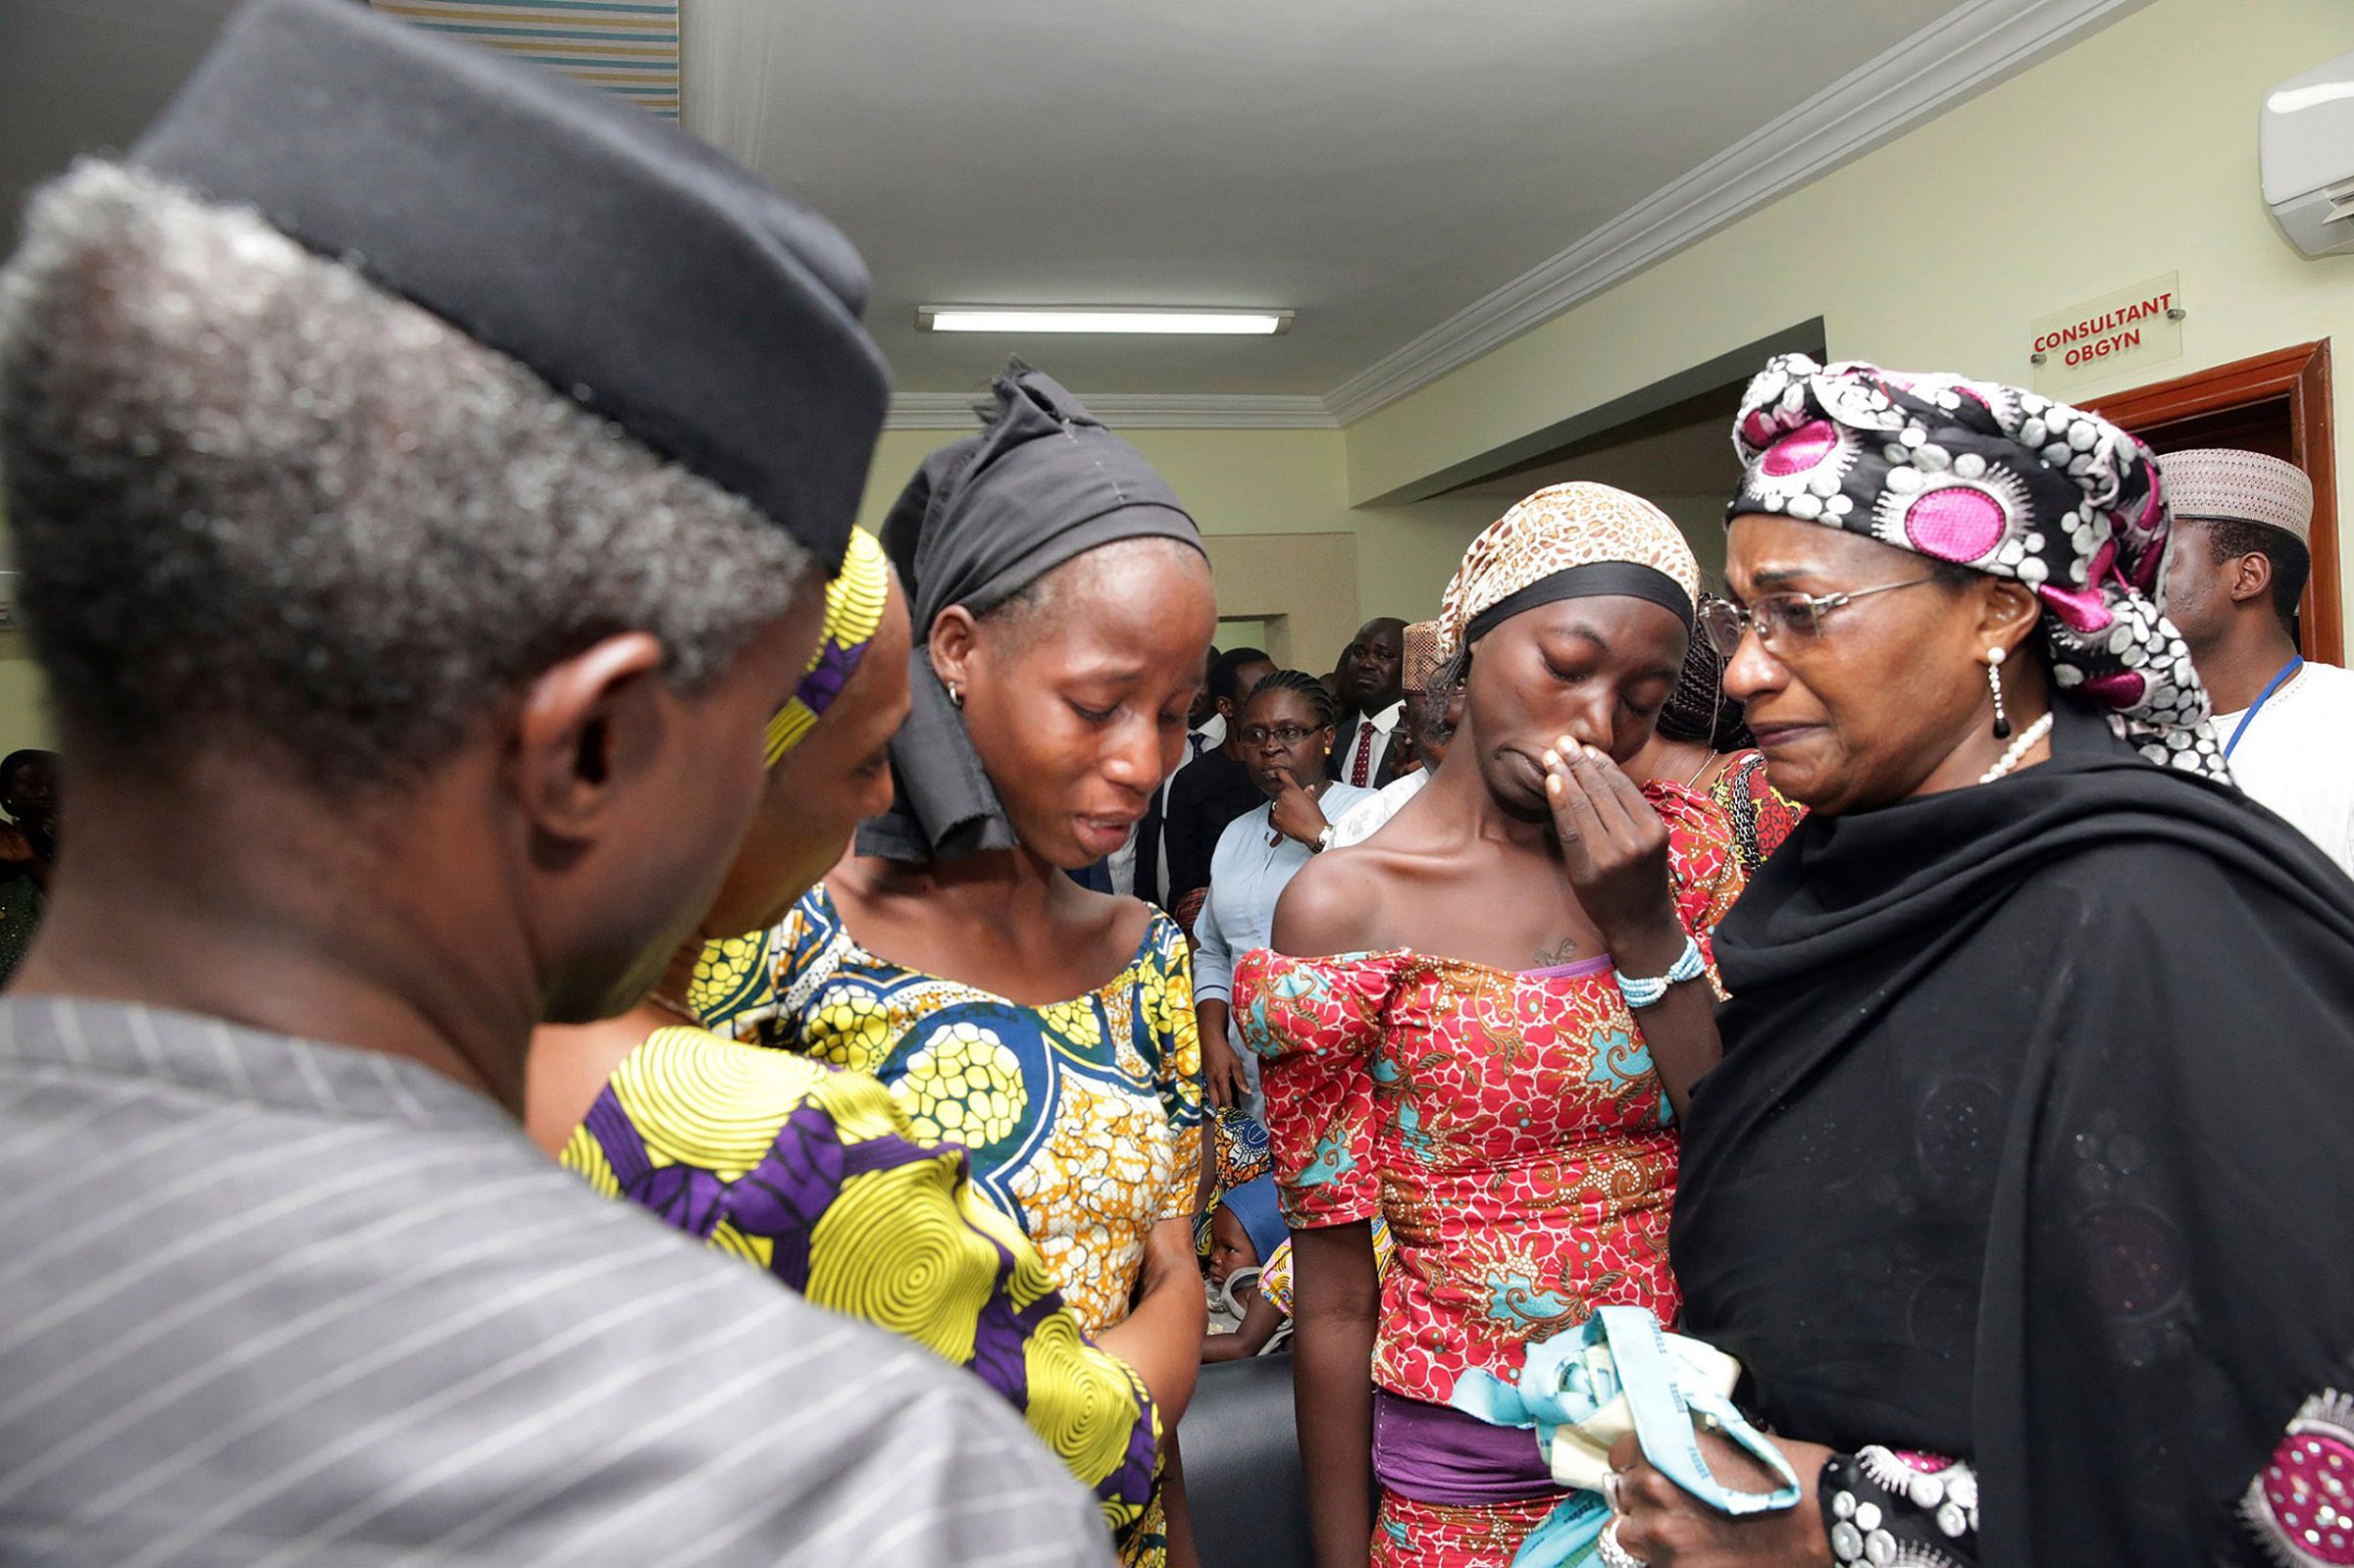 In this photo released by the Nigeria State House, Nigeria's Vice President Yemi Osinbajo, left, welcomes some of the freed Chibok school girls at the state House in Abuja, Nigeria, Thursday, Oct. 13, 2016. Twenty-one of the Chibok schoolgirls kidnapped by Boko Haram more than two years ago were freed Thursday in a swap for detained leaders of the Islamic extremist group ‚Äî the first release since nearly 300 girls were taken captive in a case that provoked international outrage. (Sunday Aghaeze/Nigeria State House via AP)